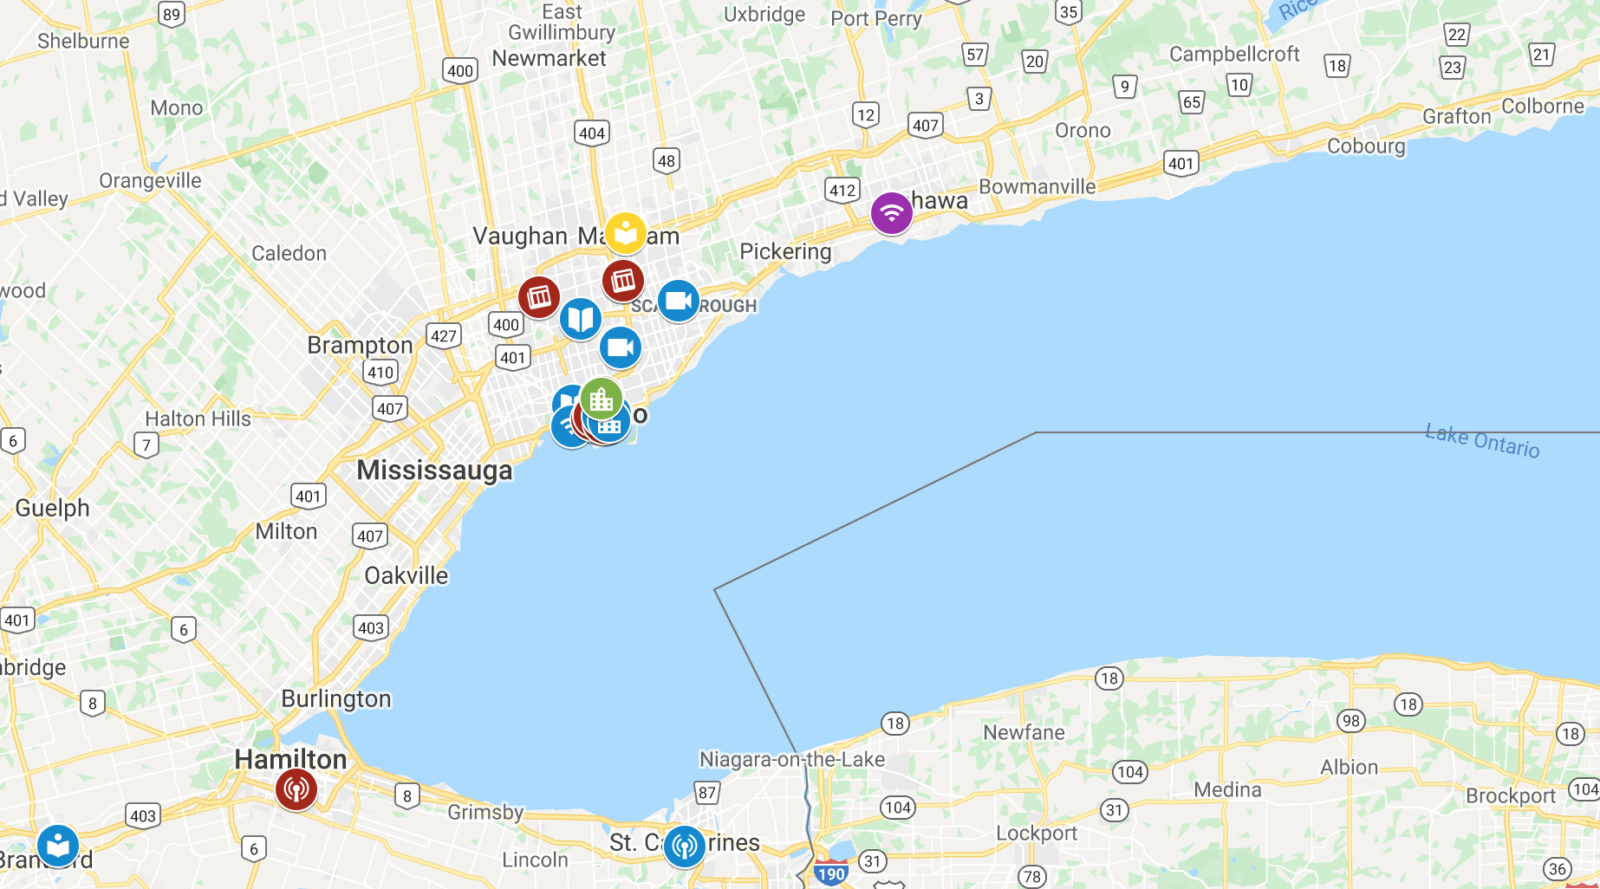 map of GTA with local news closures indicated